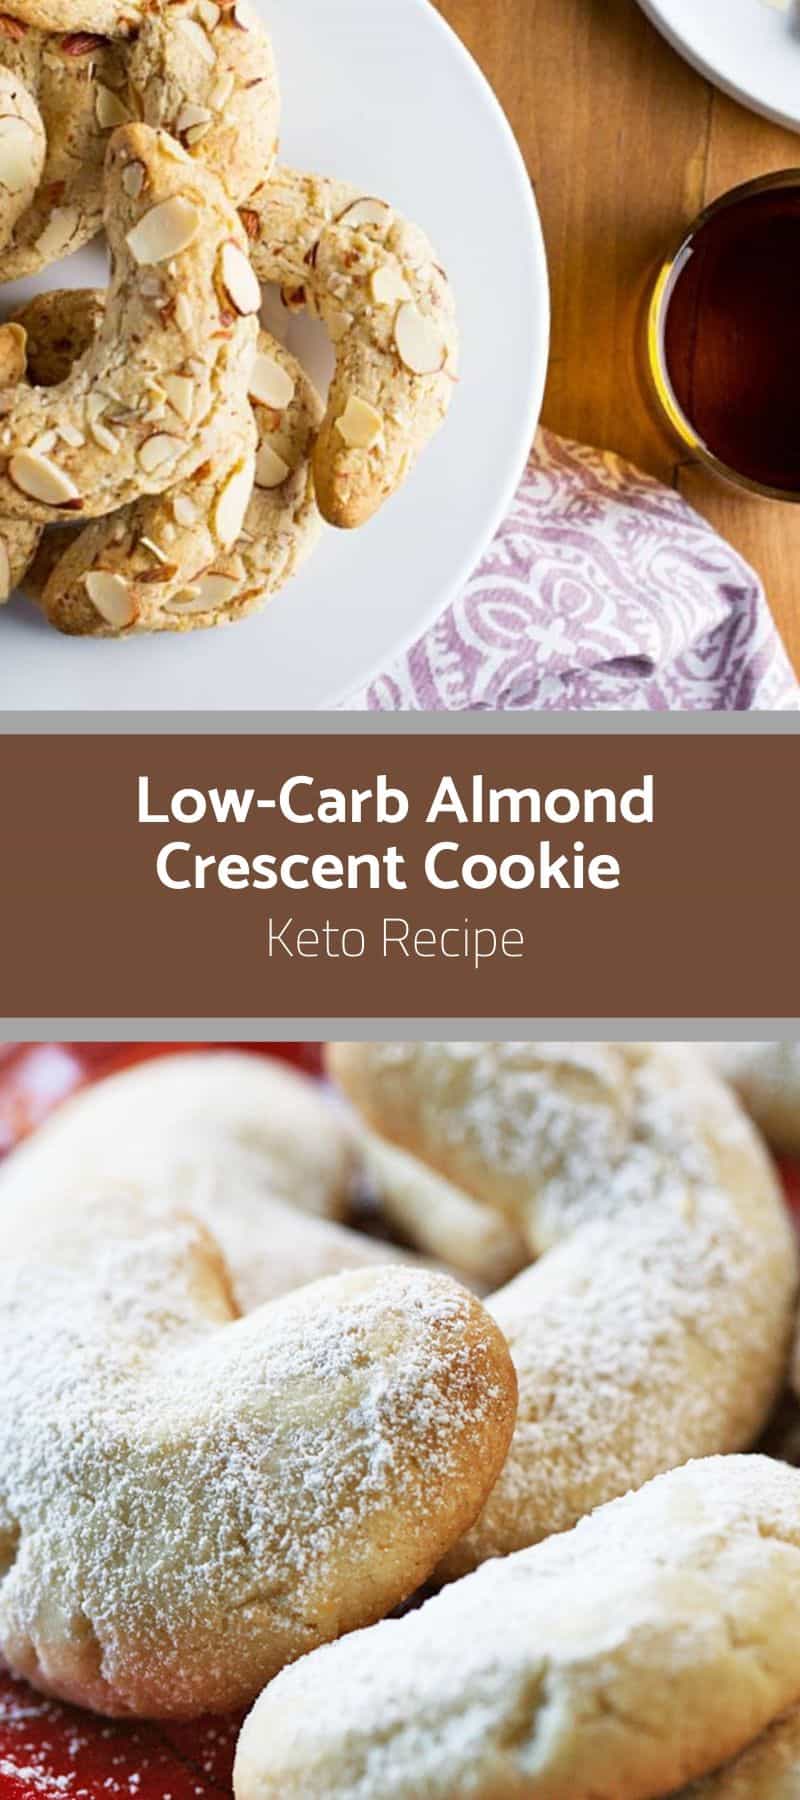 Low-Carb Almond Crescent Cookie Recipe